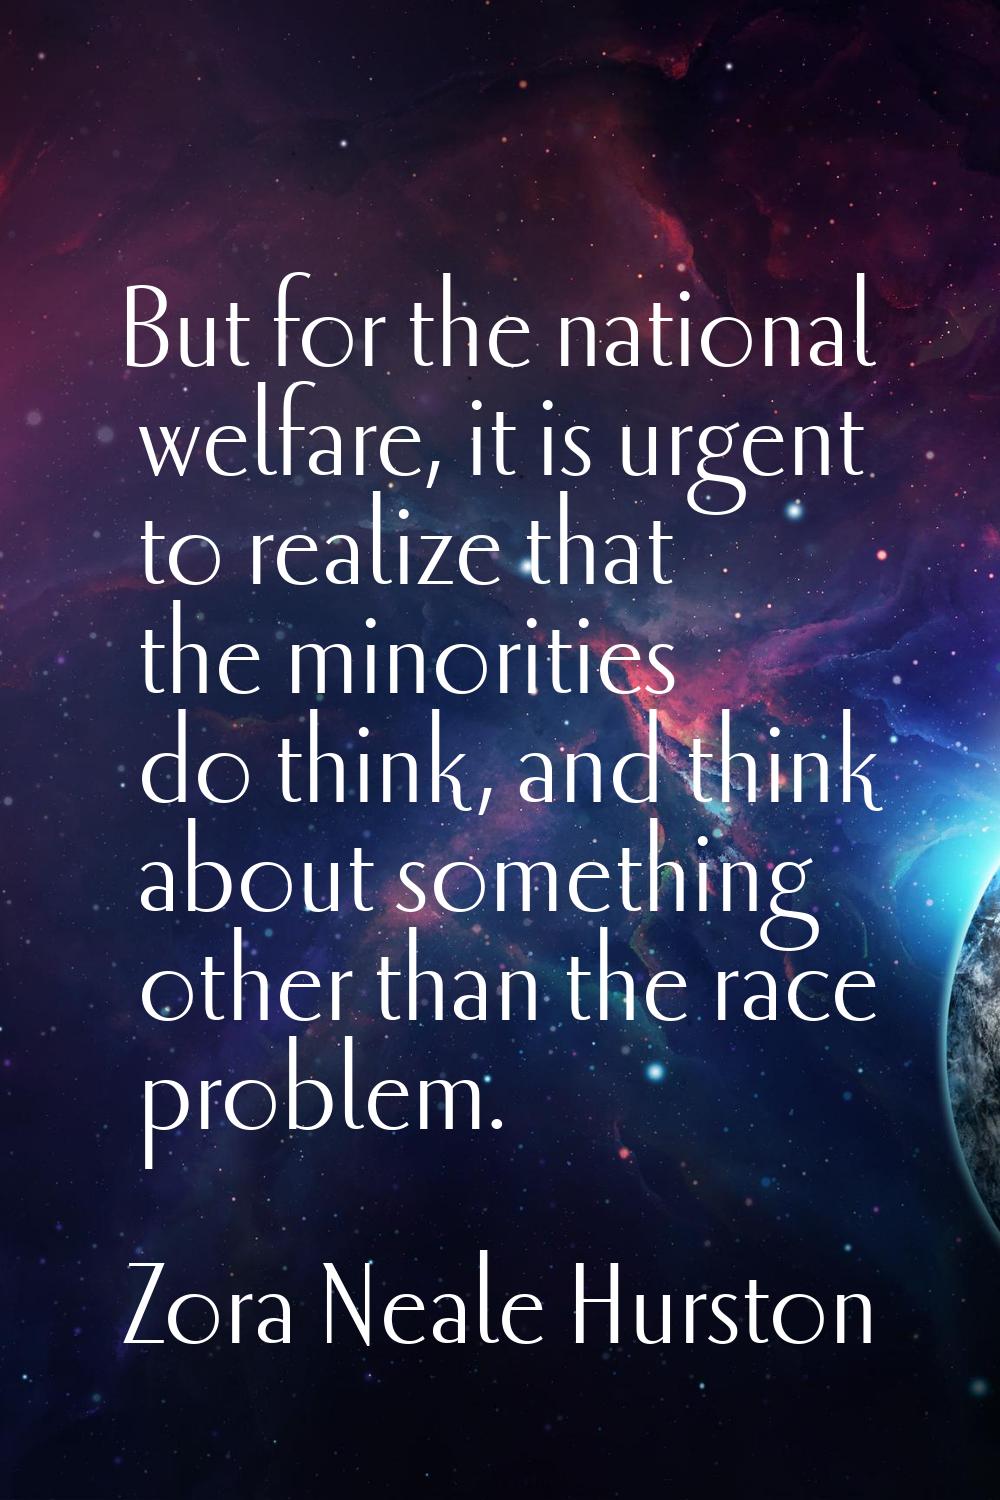 But for the national welfare, it is urgent to realize that the minorities do think, and think about